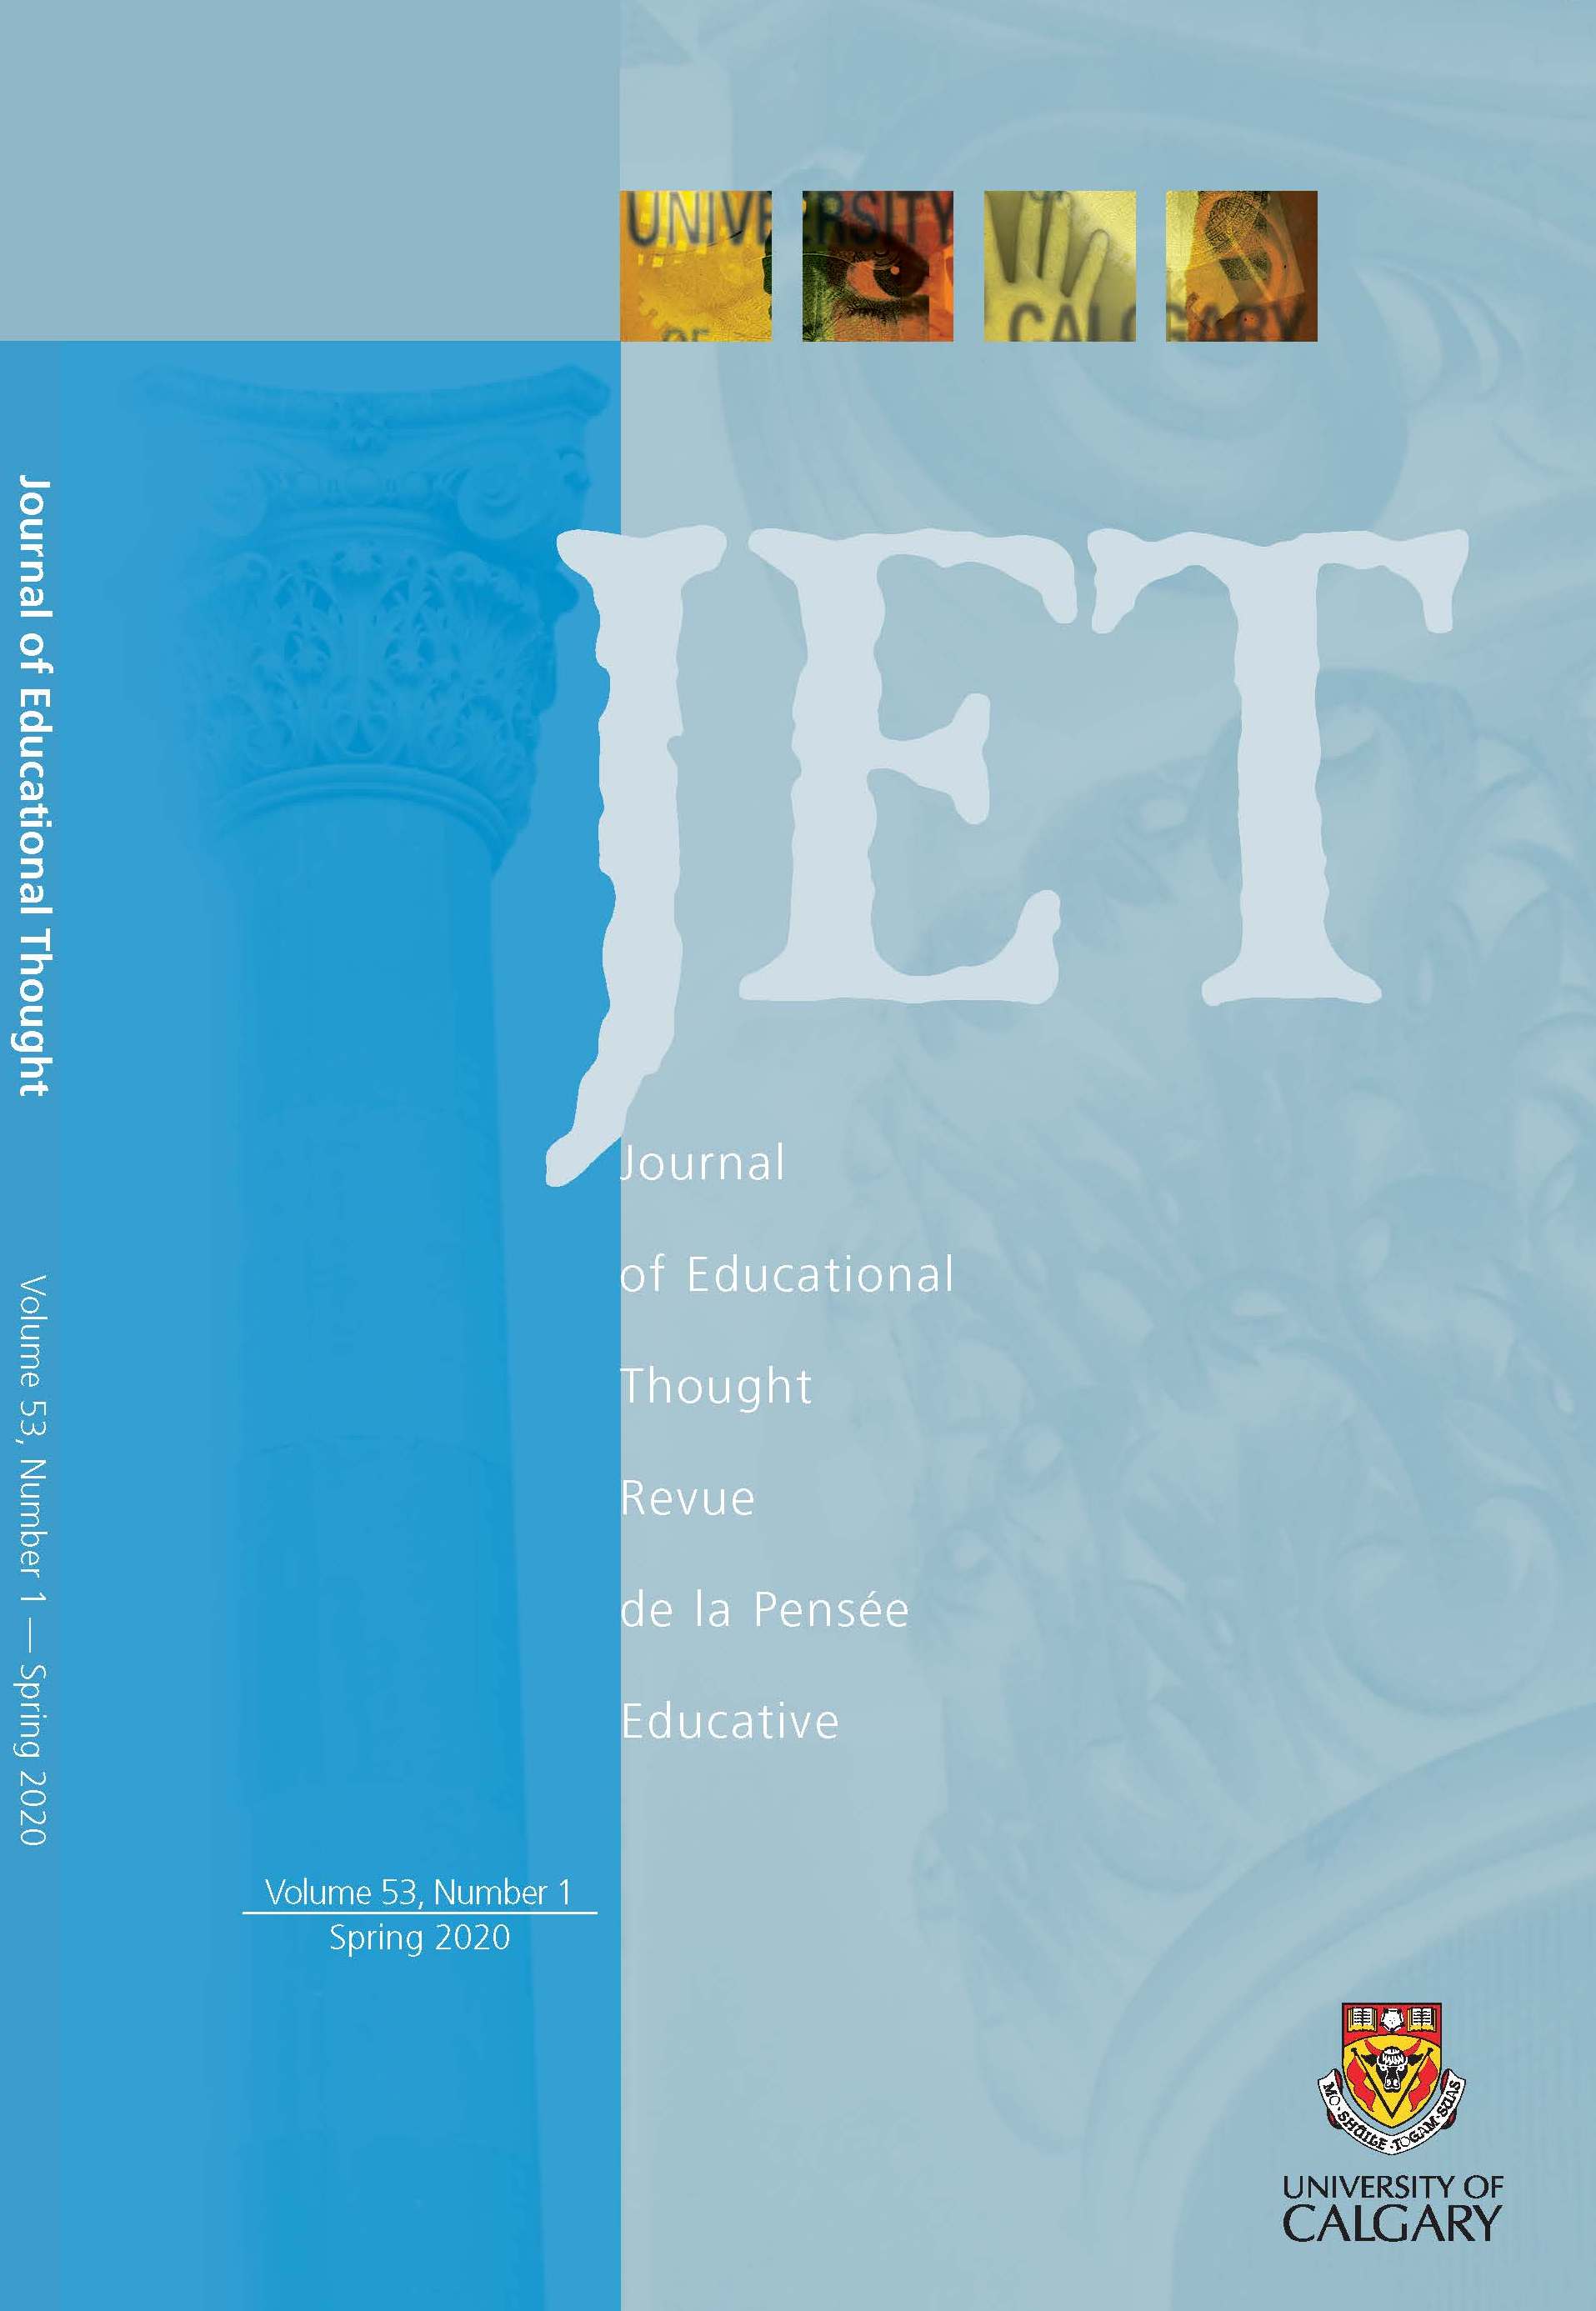 					View Vol. 53 No. 1 (2020): Journal of Educational Thought
				